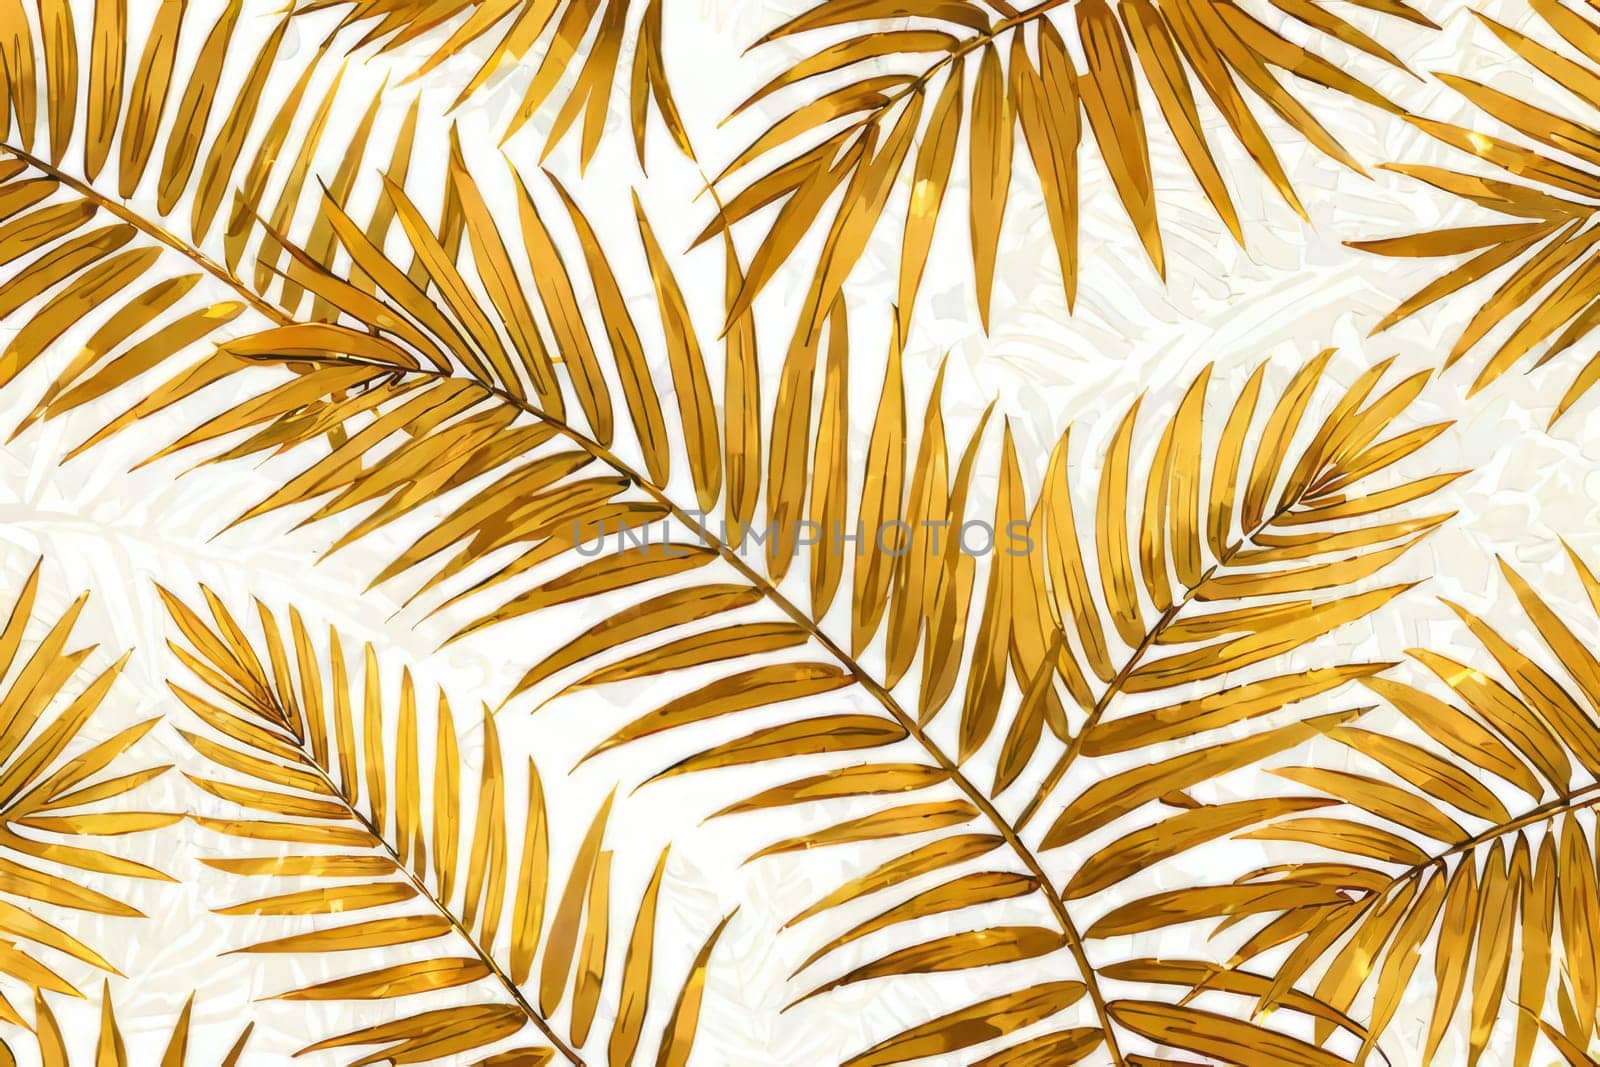 Graceful Botanical Charm: Intricate golden palm leaves adorning a textured cream surface, creating a sense of refined beauty